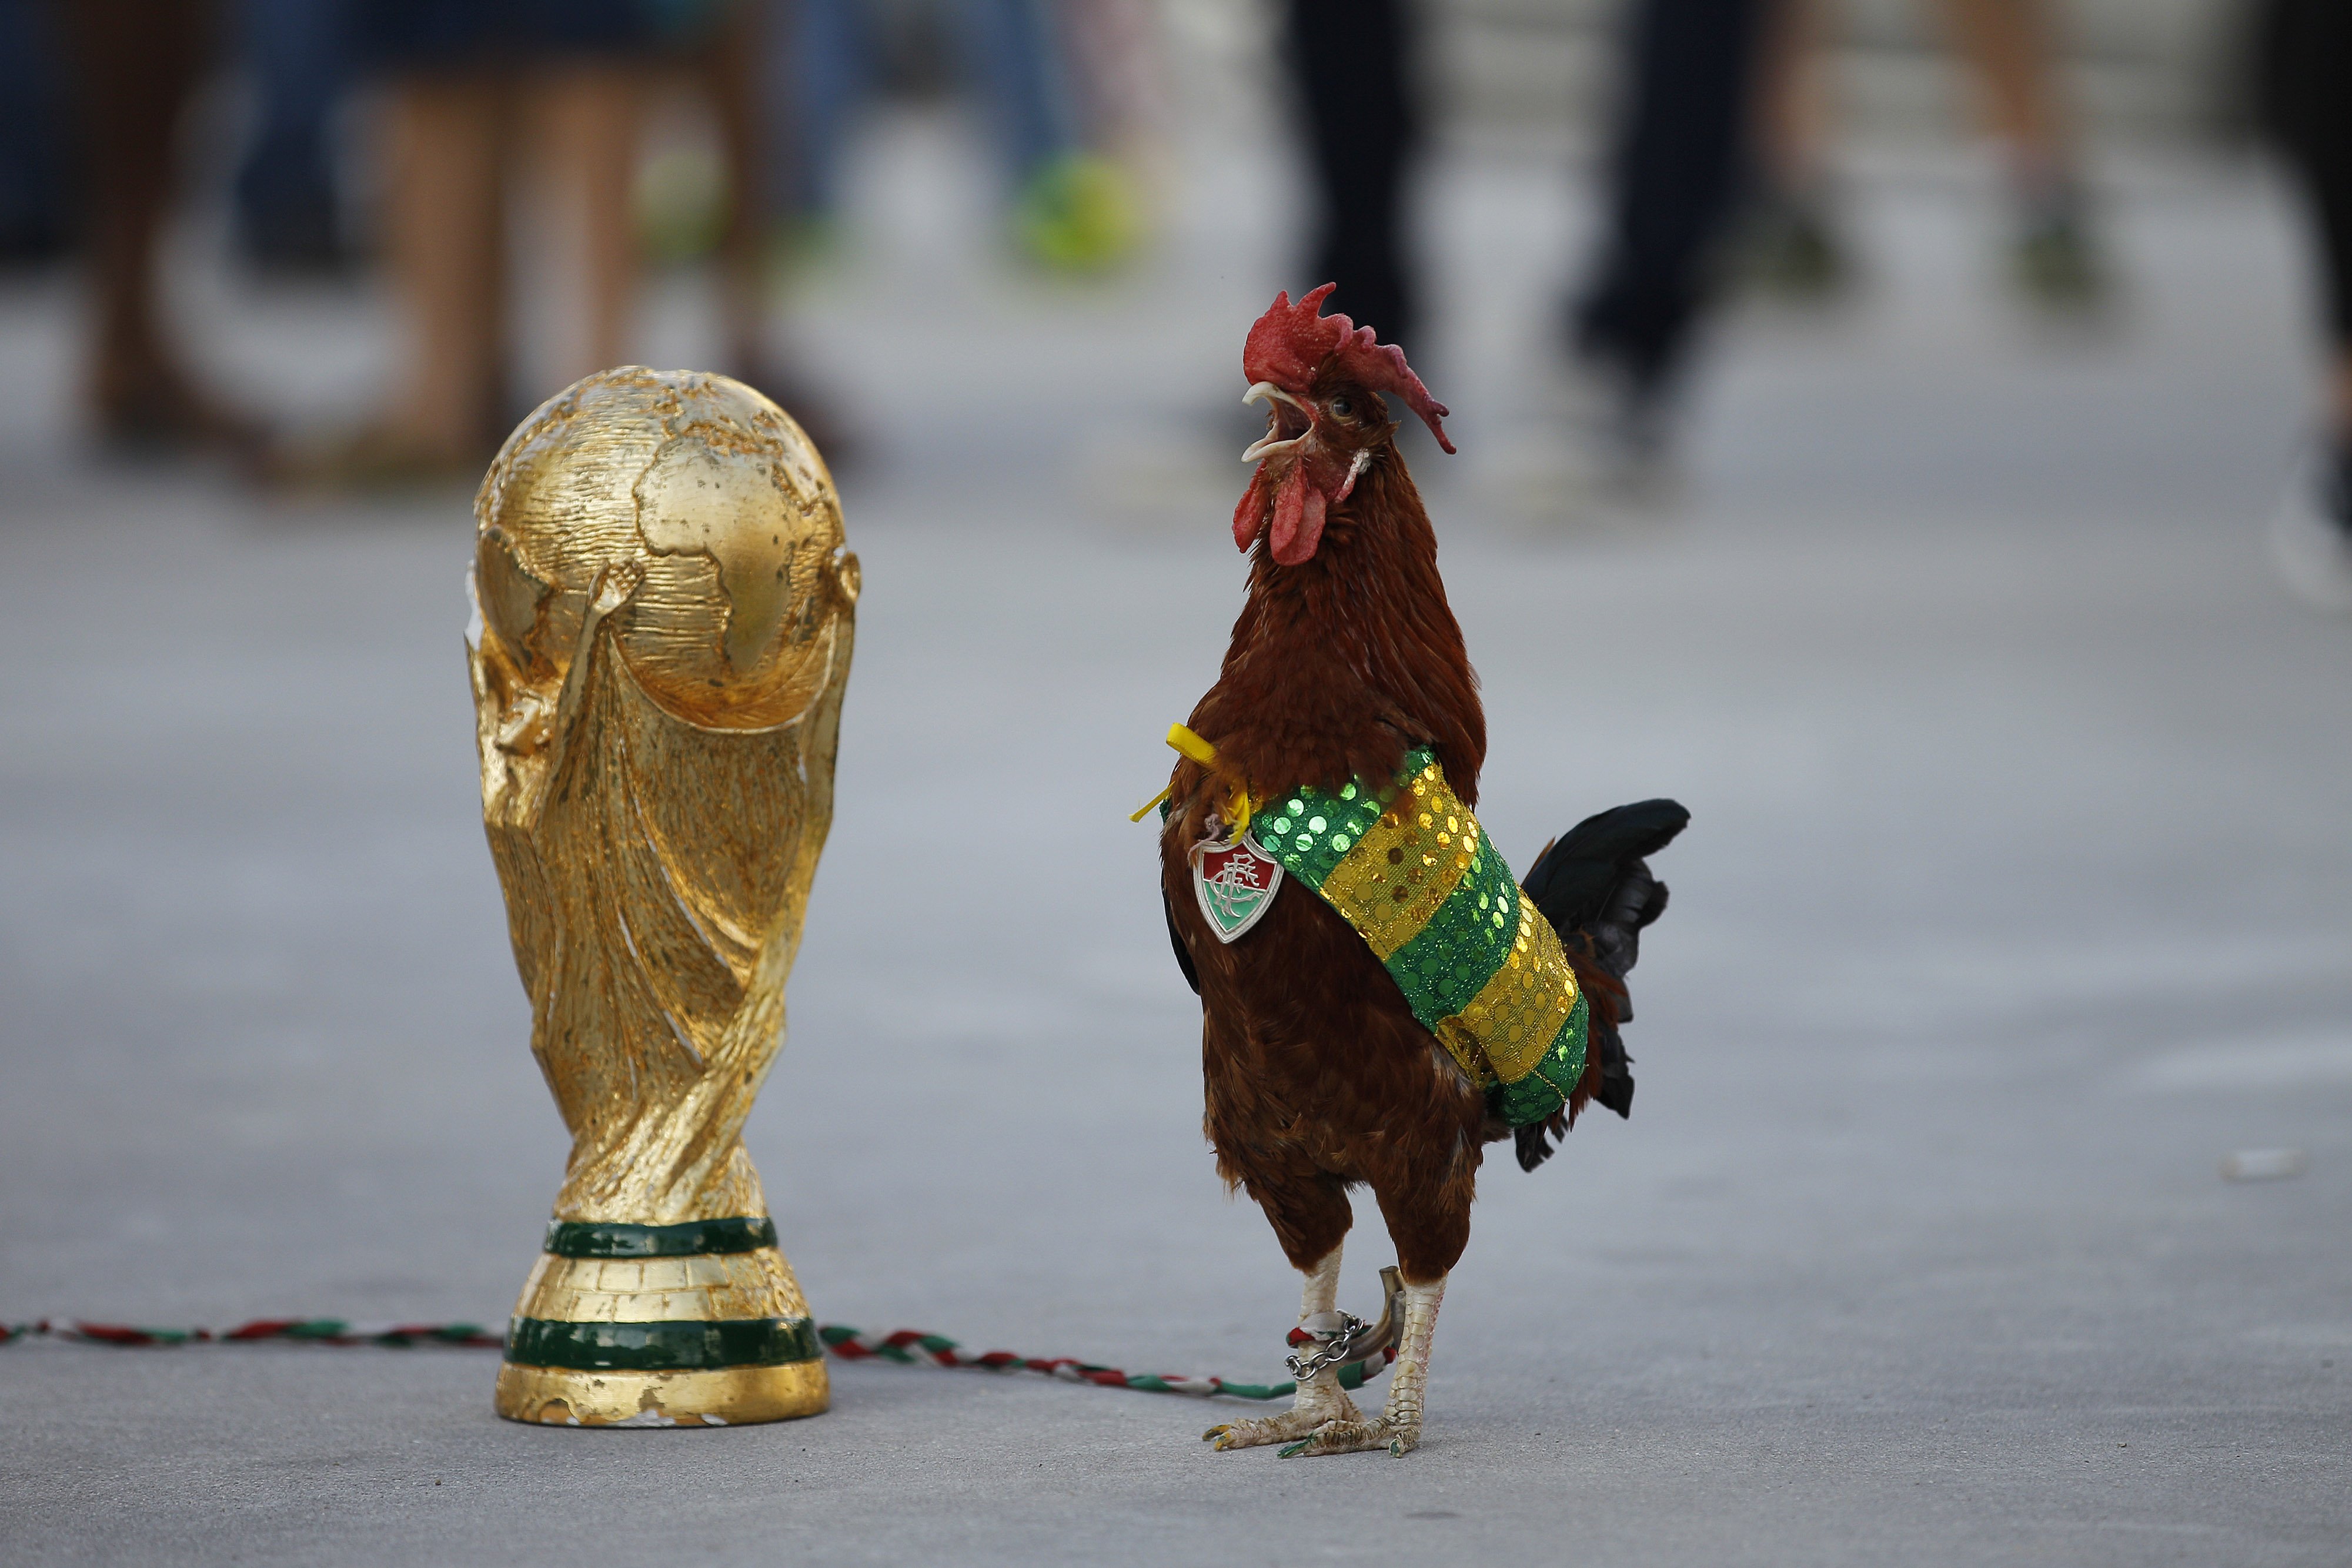 A pet rooster named Paquita Fred stands next to a replica of the World Cup trophy in front of Maracana stadium, in Rio de Janeiro on June 11, 2014. T